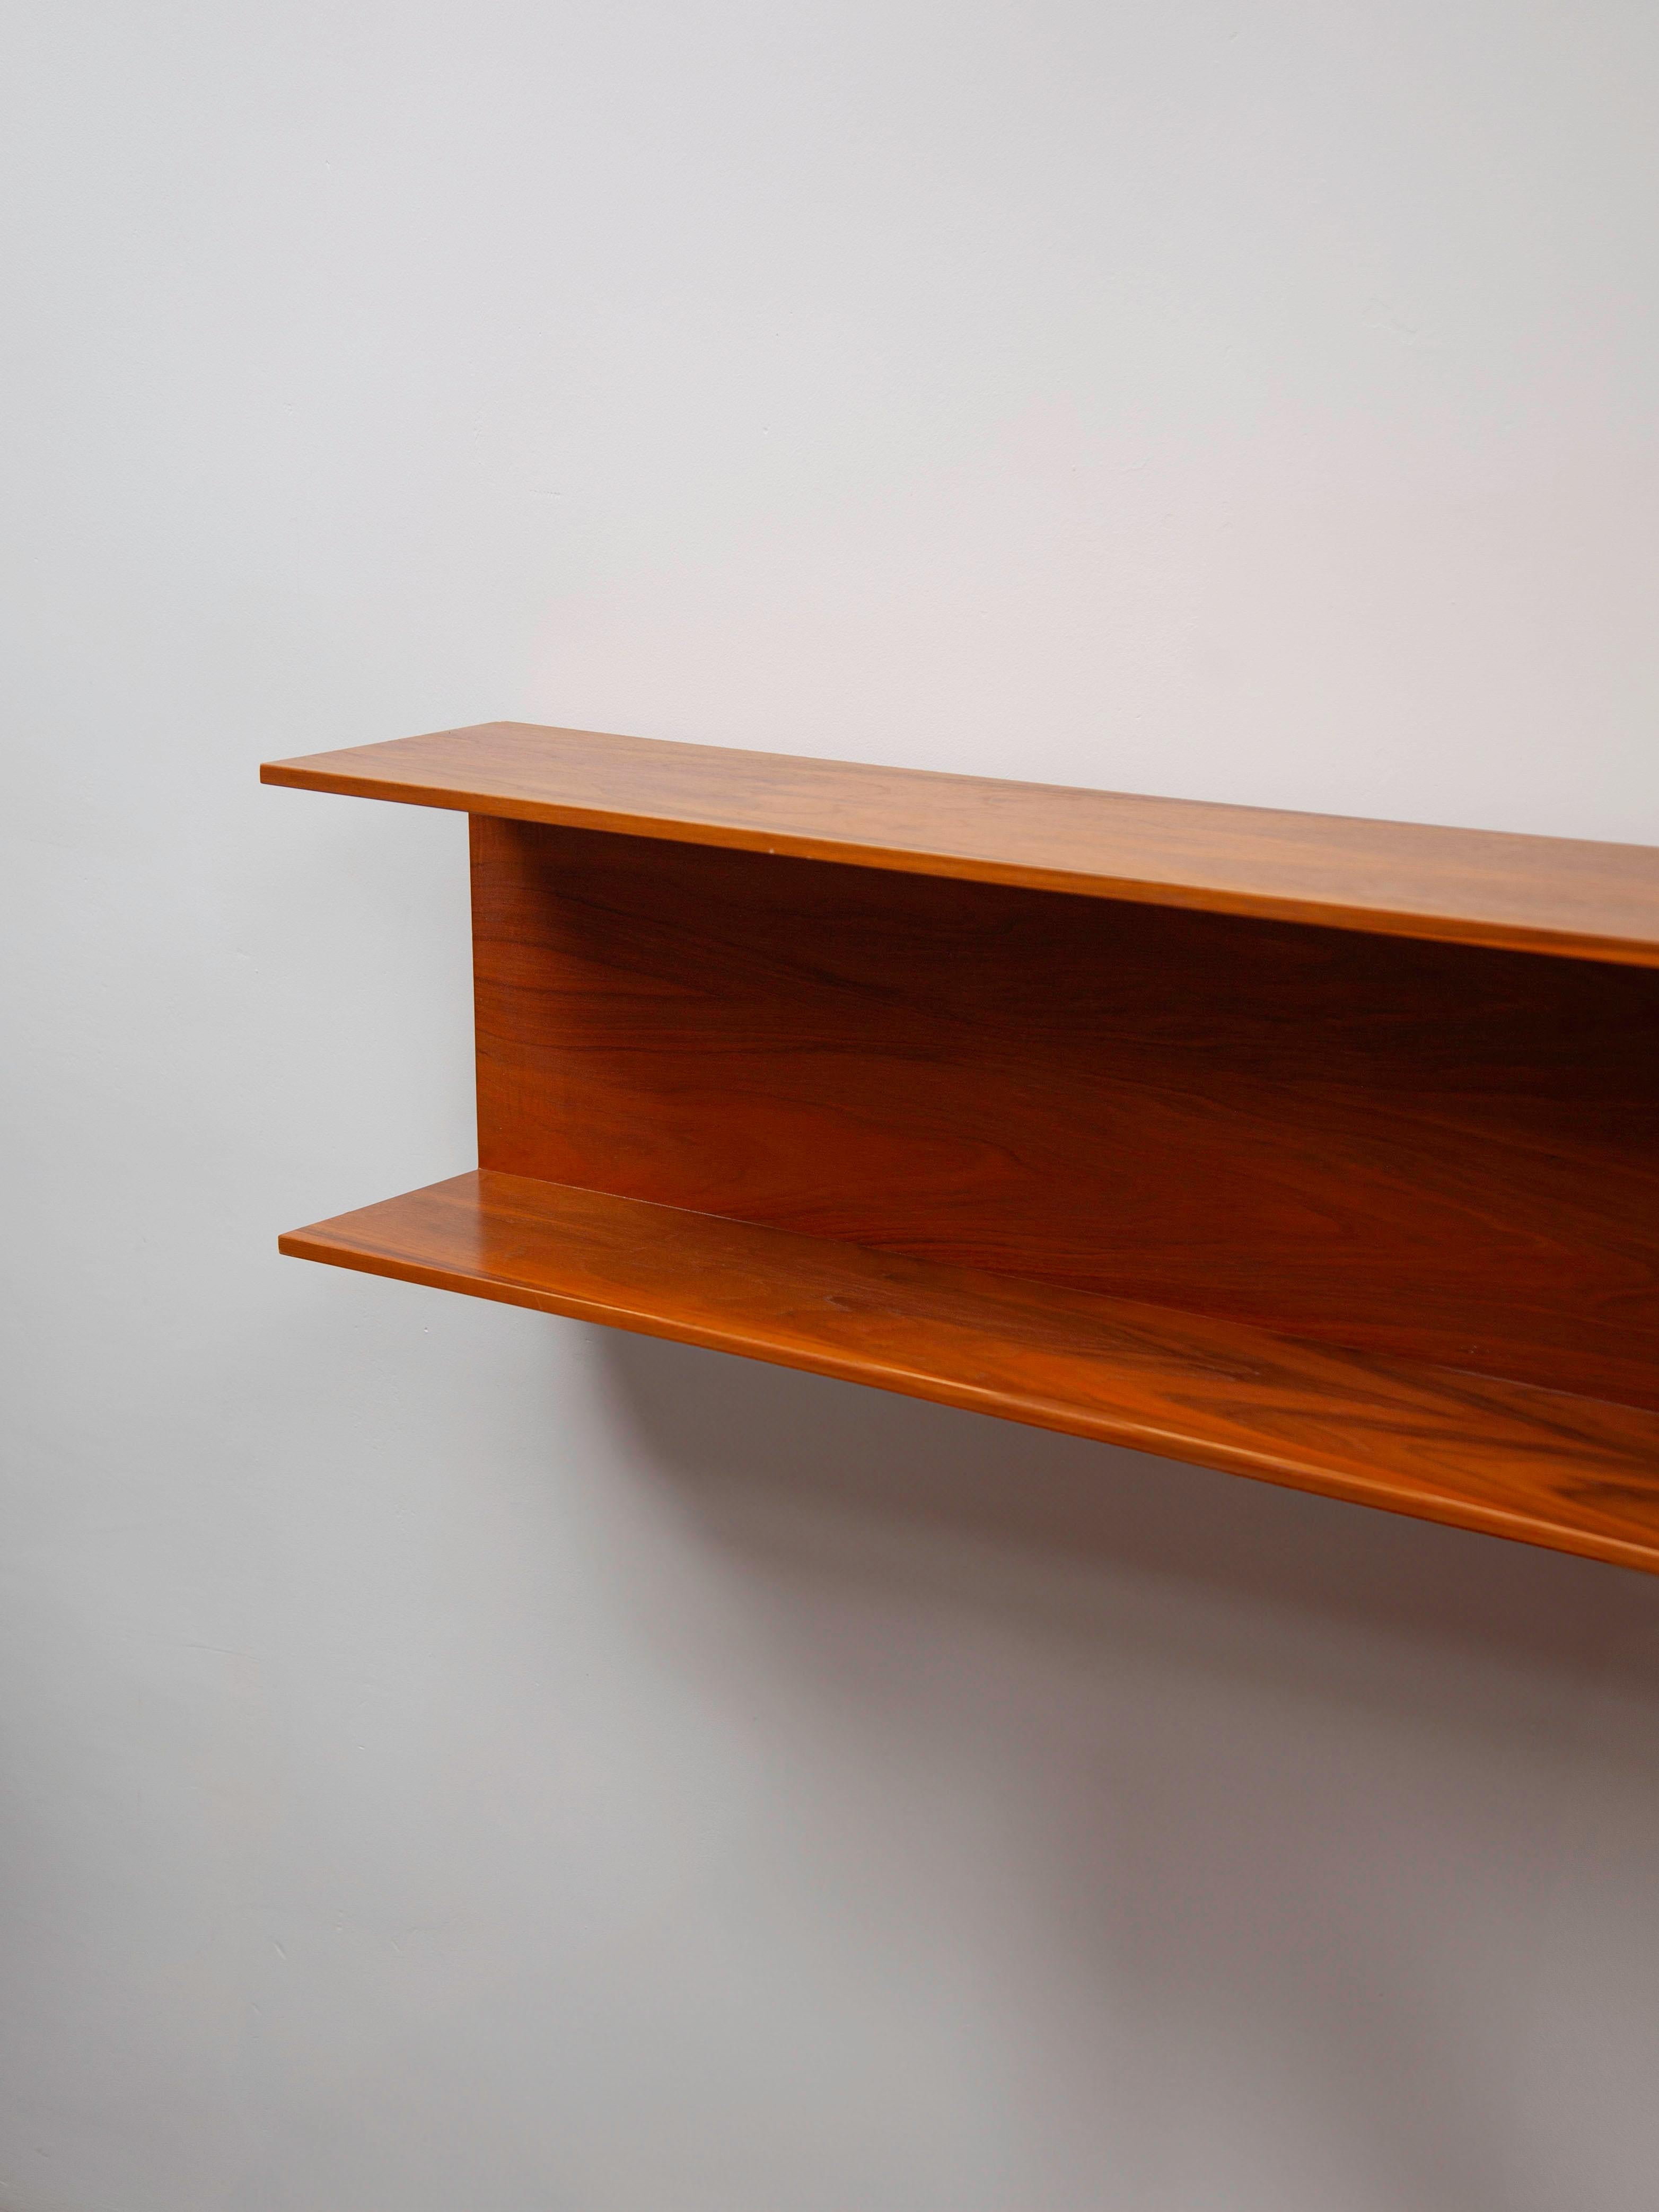 Hand-Crafted Large Floating Teak Wall Mounted Shelf by Walter Wirtz for Wilhelm Renz, 1960s  For Sale